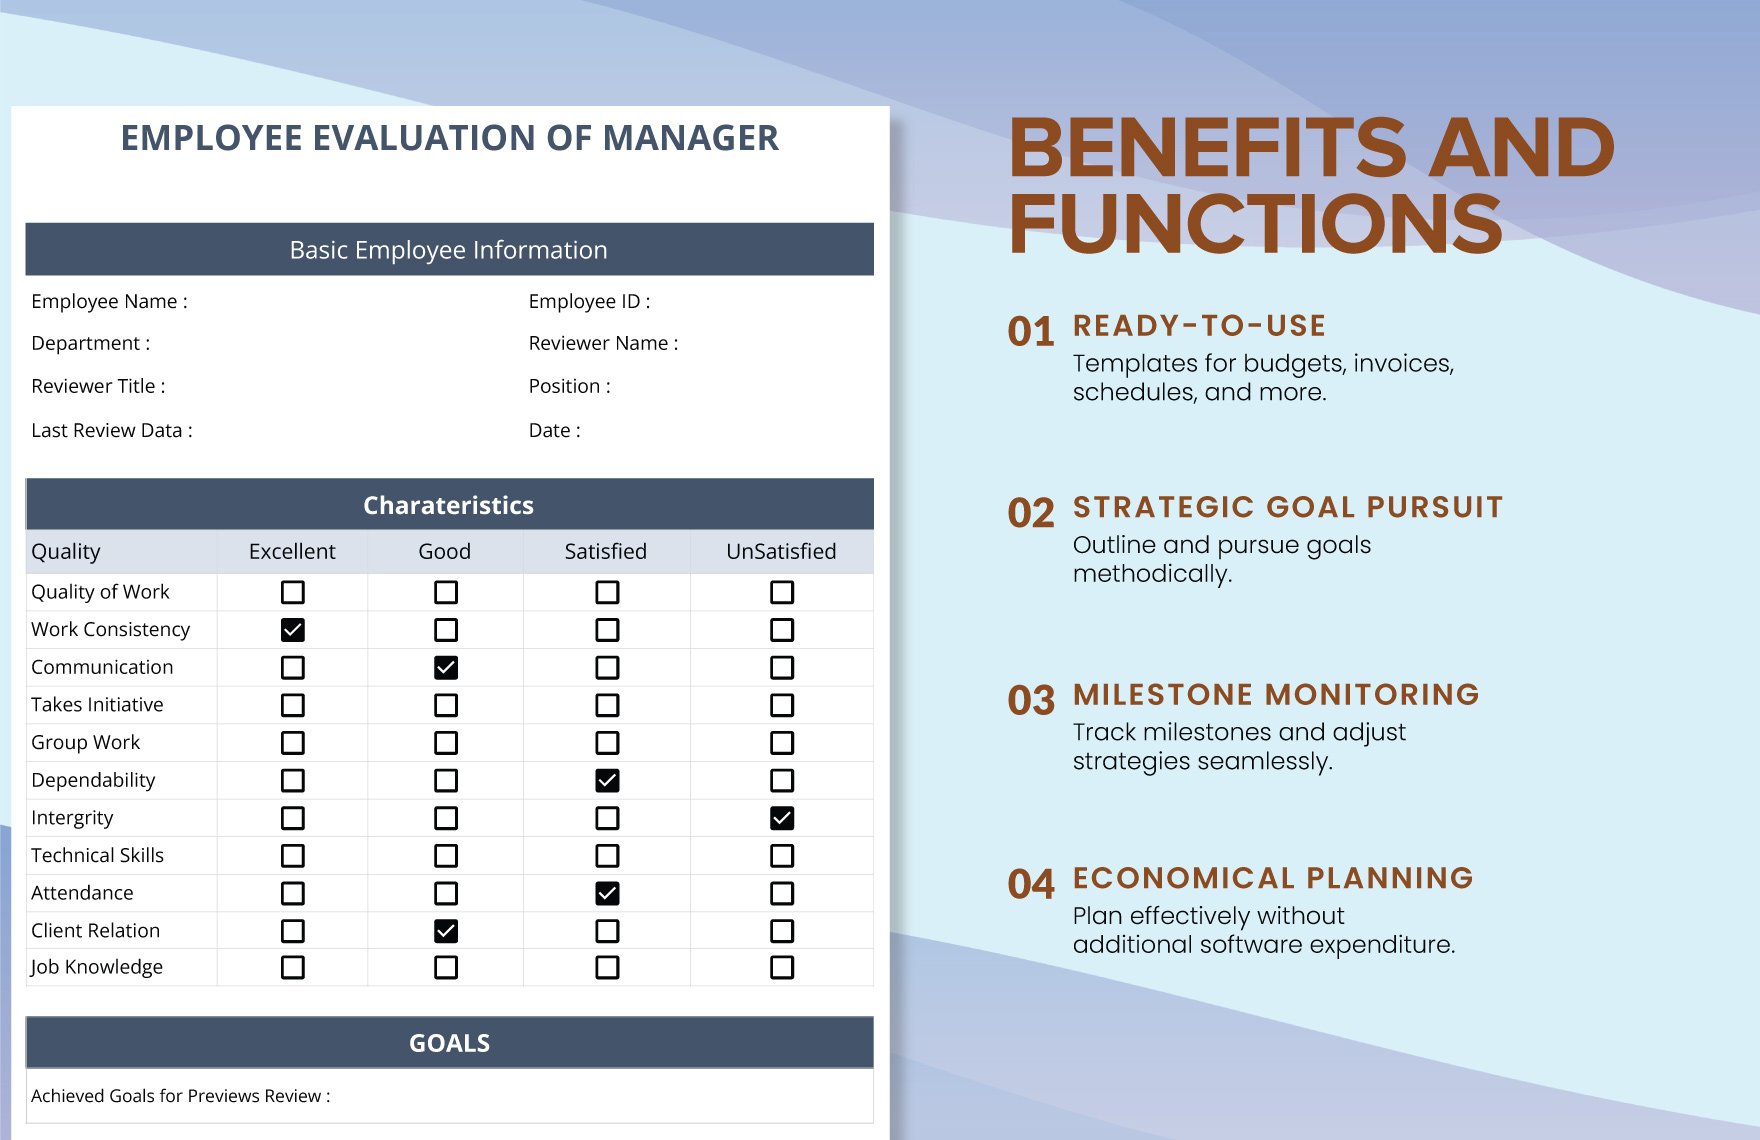 Employee Evaluation of Manager Template